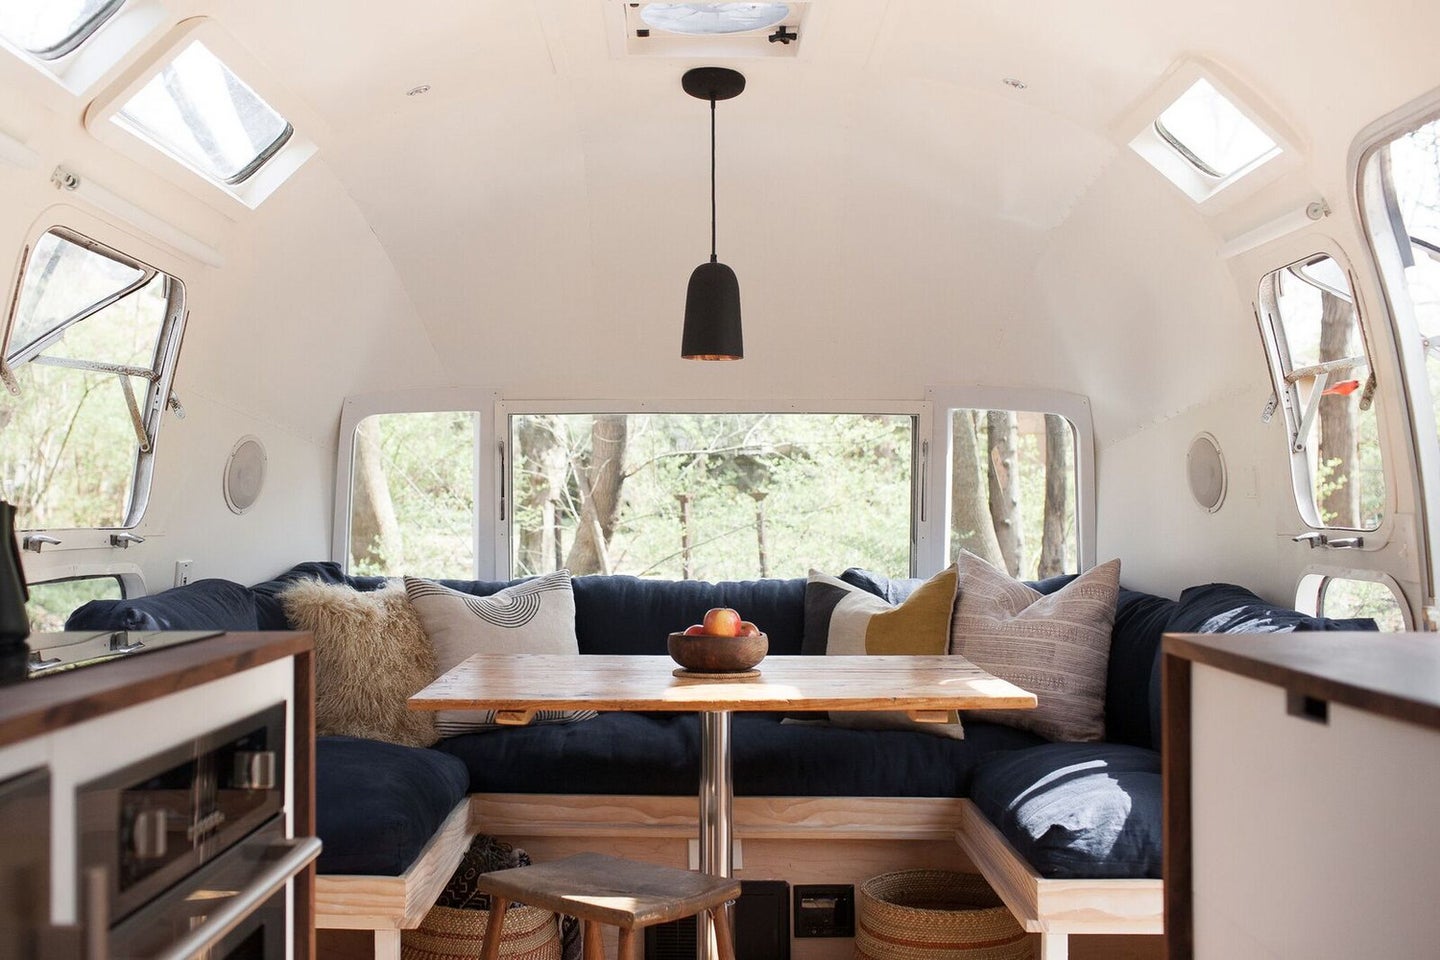 Get Expert Tips on Living In Small Spaces